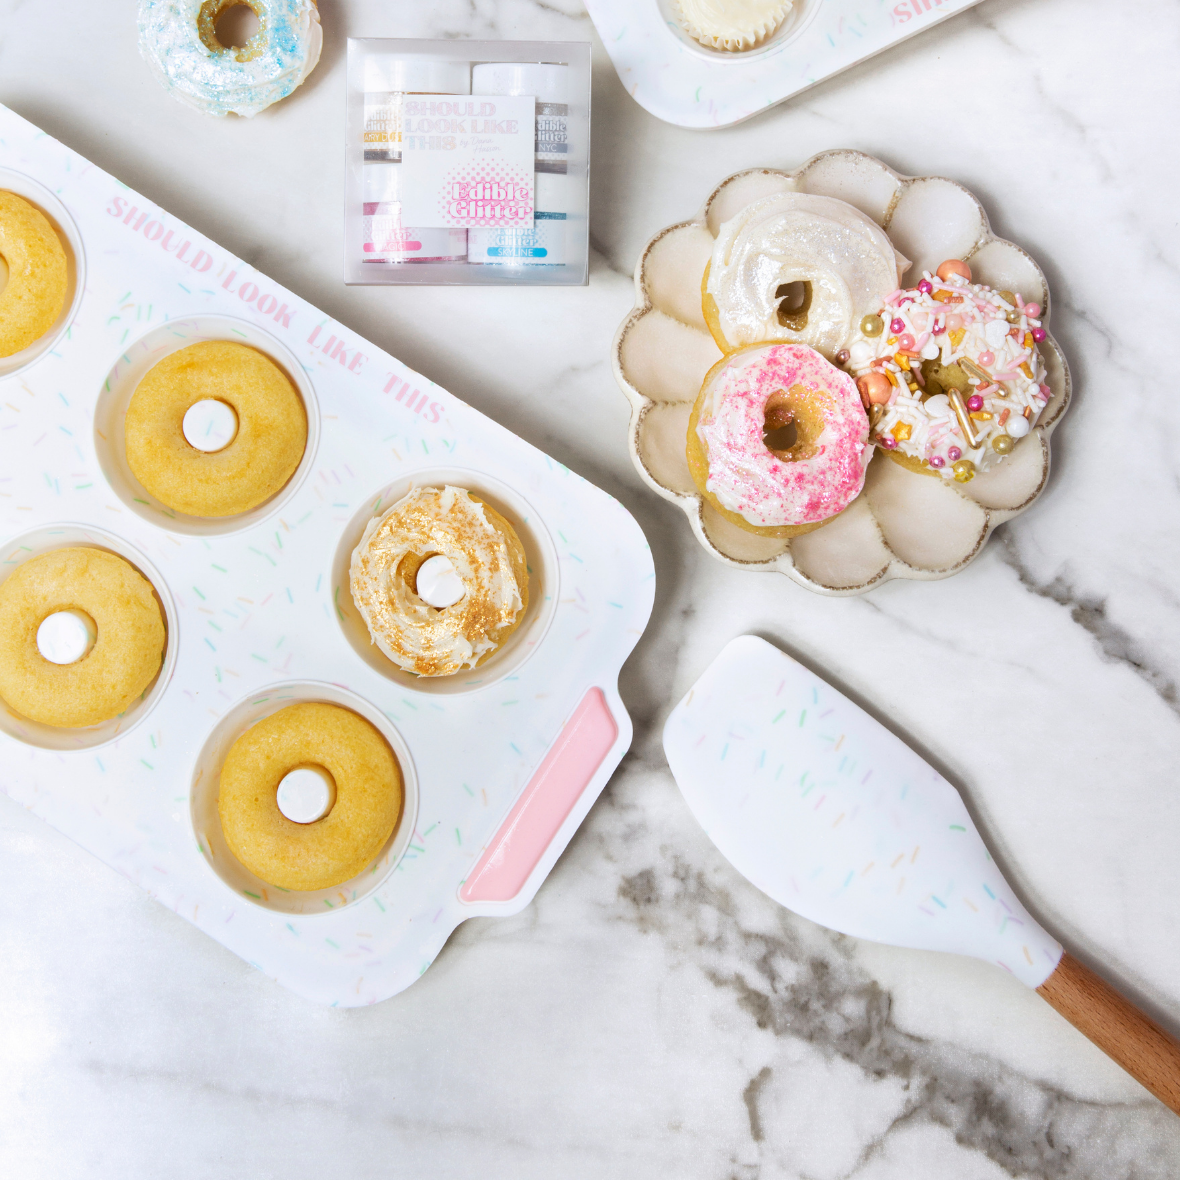 donut pan, spatula, edible glitter, and donuts displayed on countertop